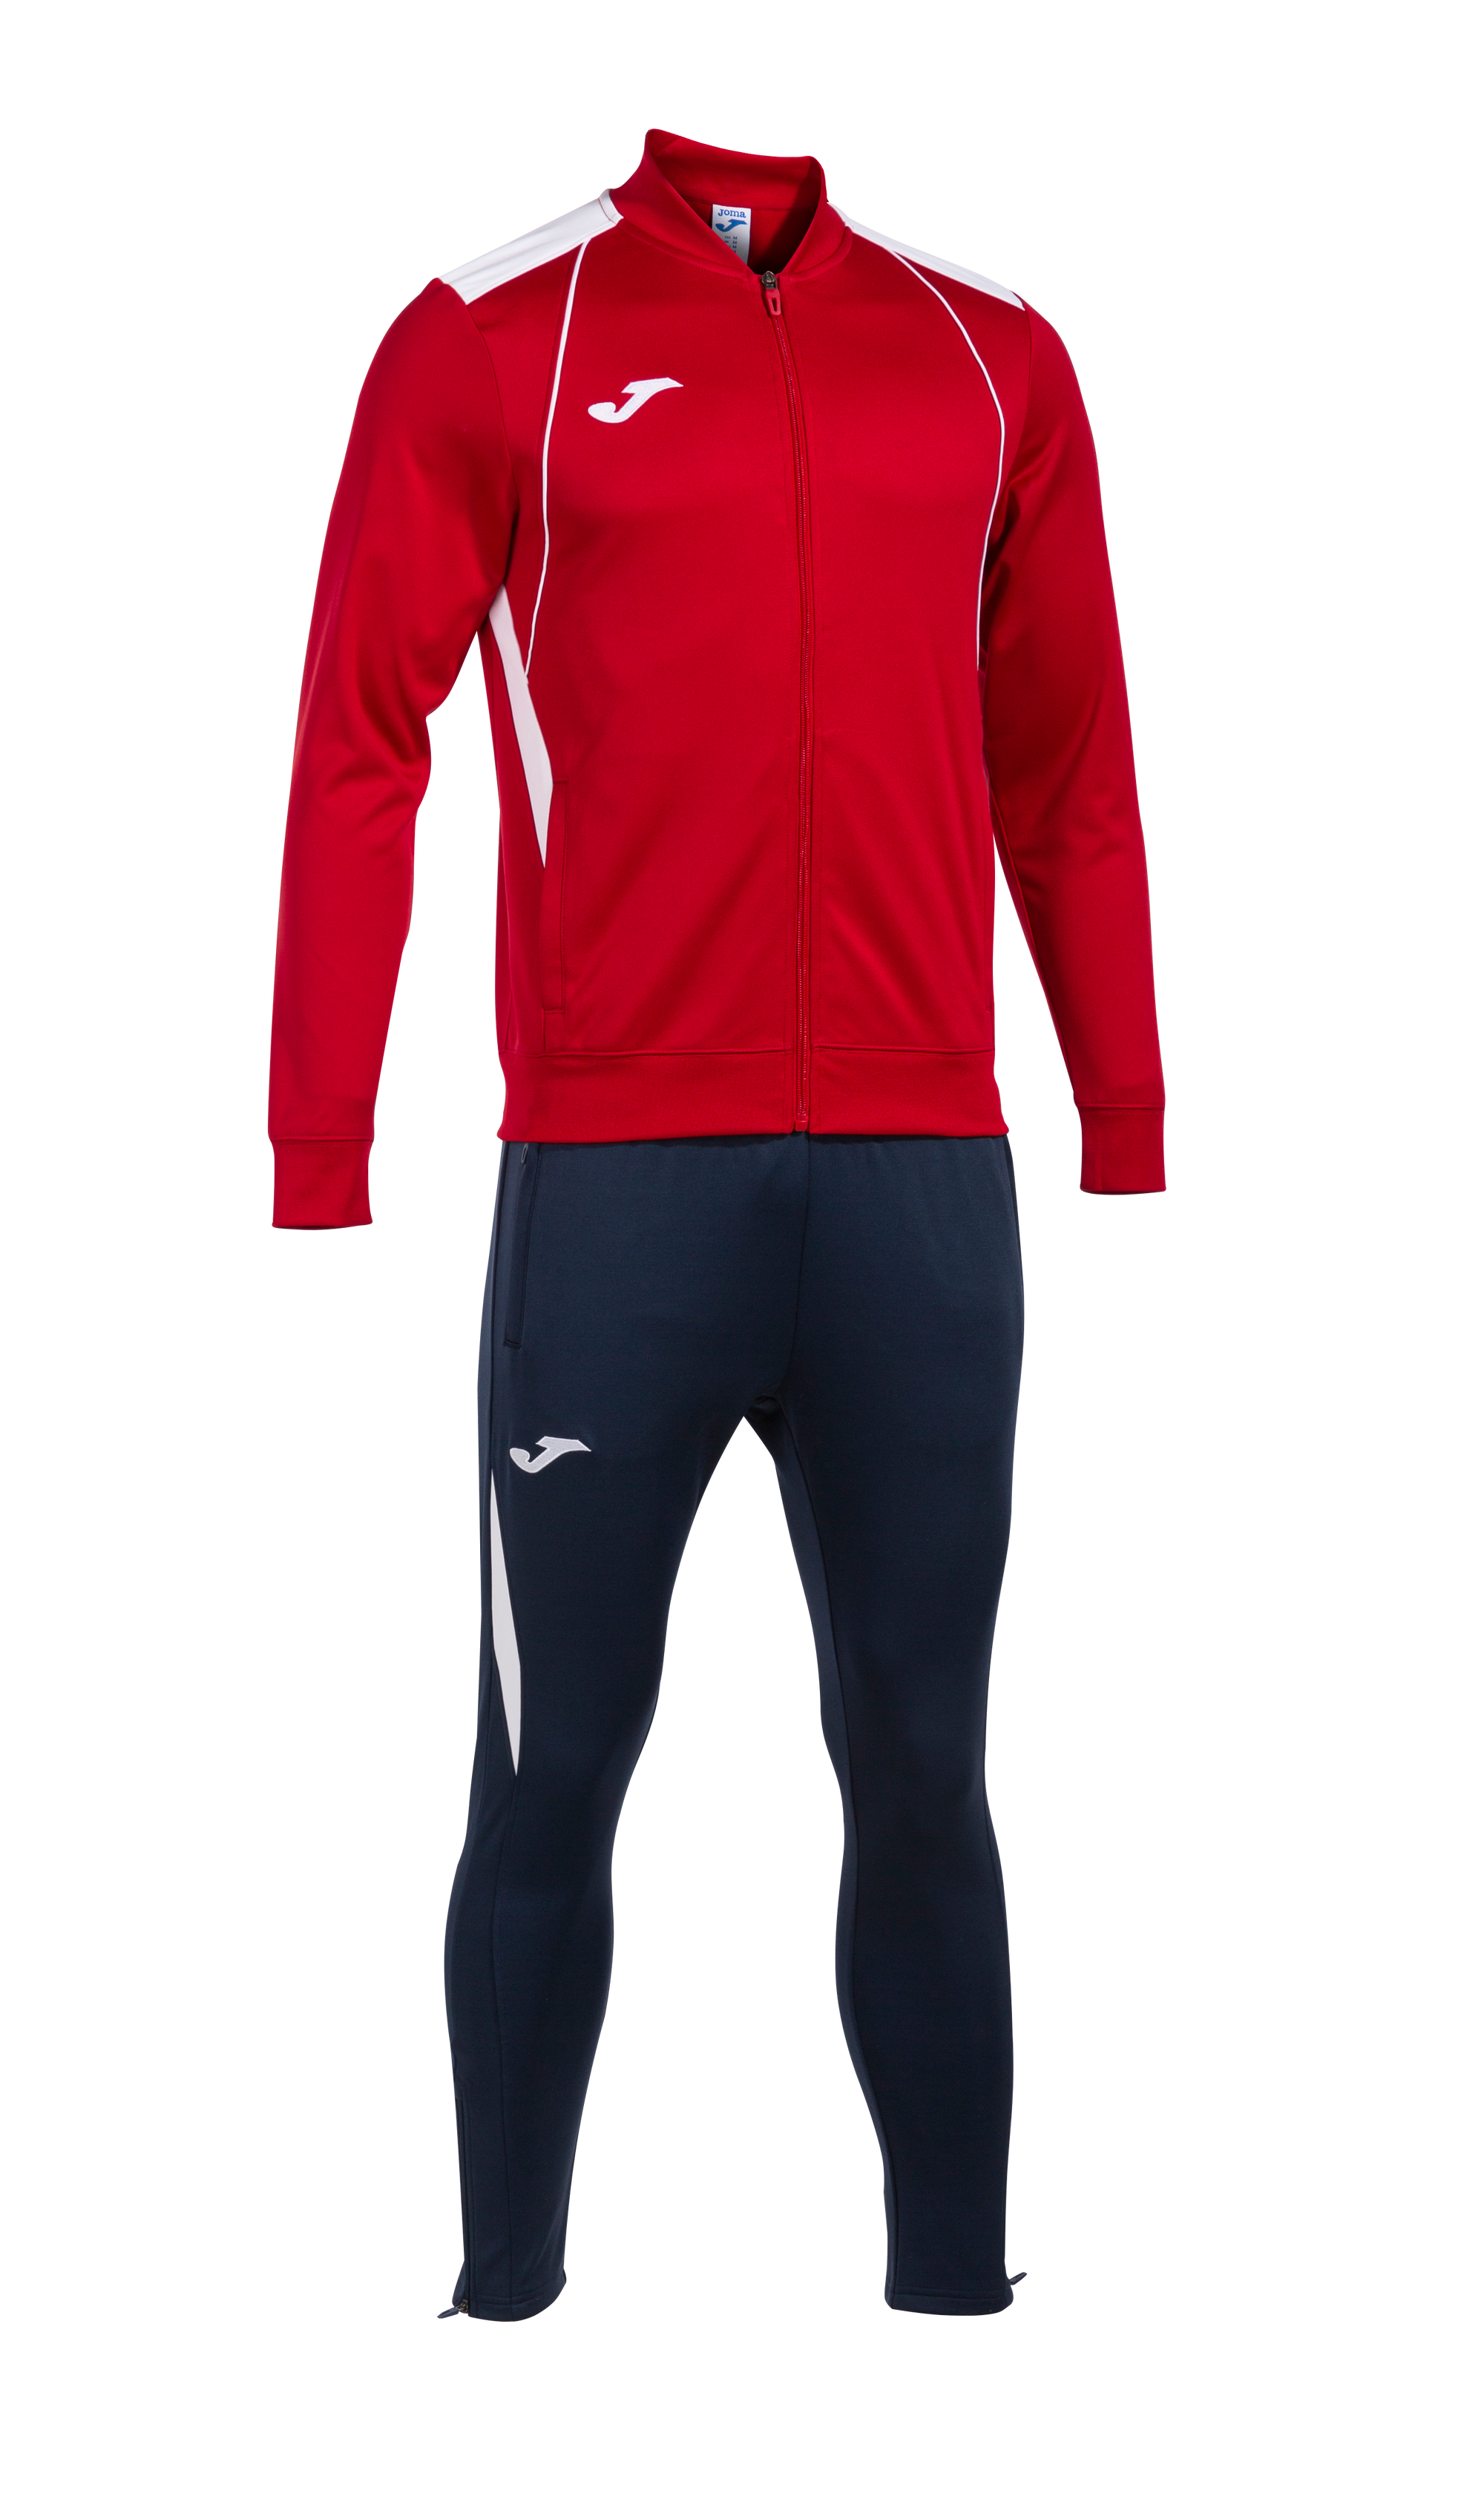 Joma Championship VII Tracksuit - Red/White